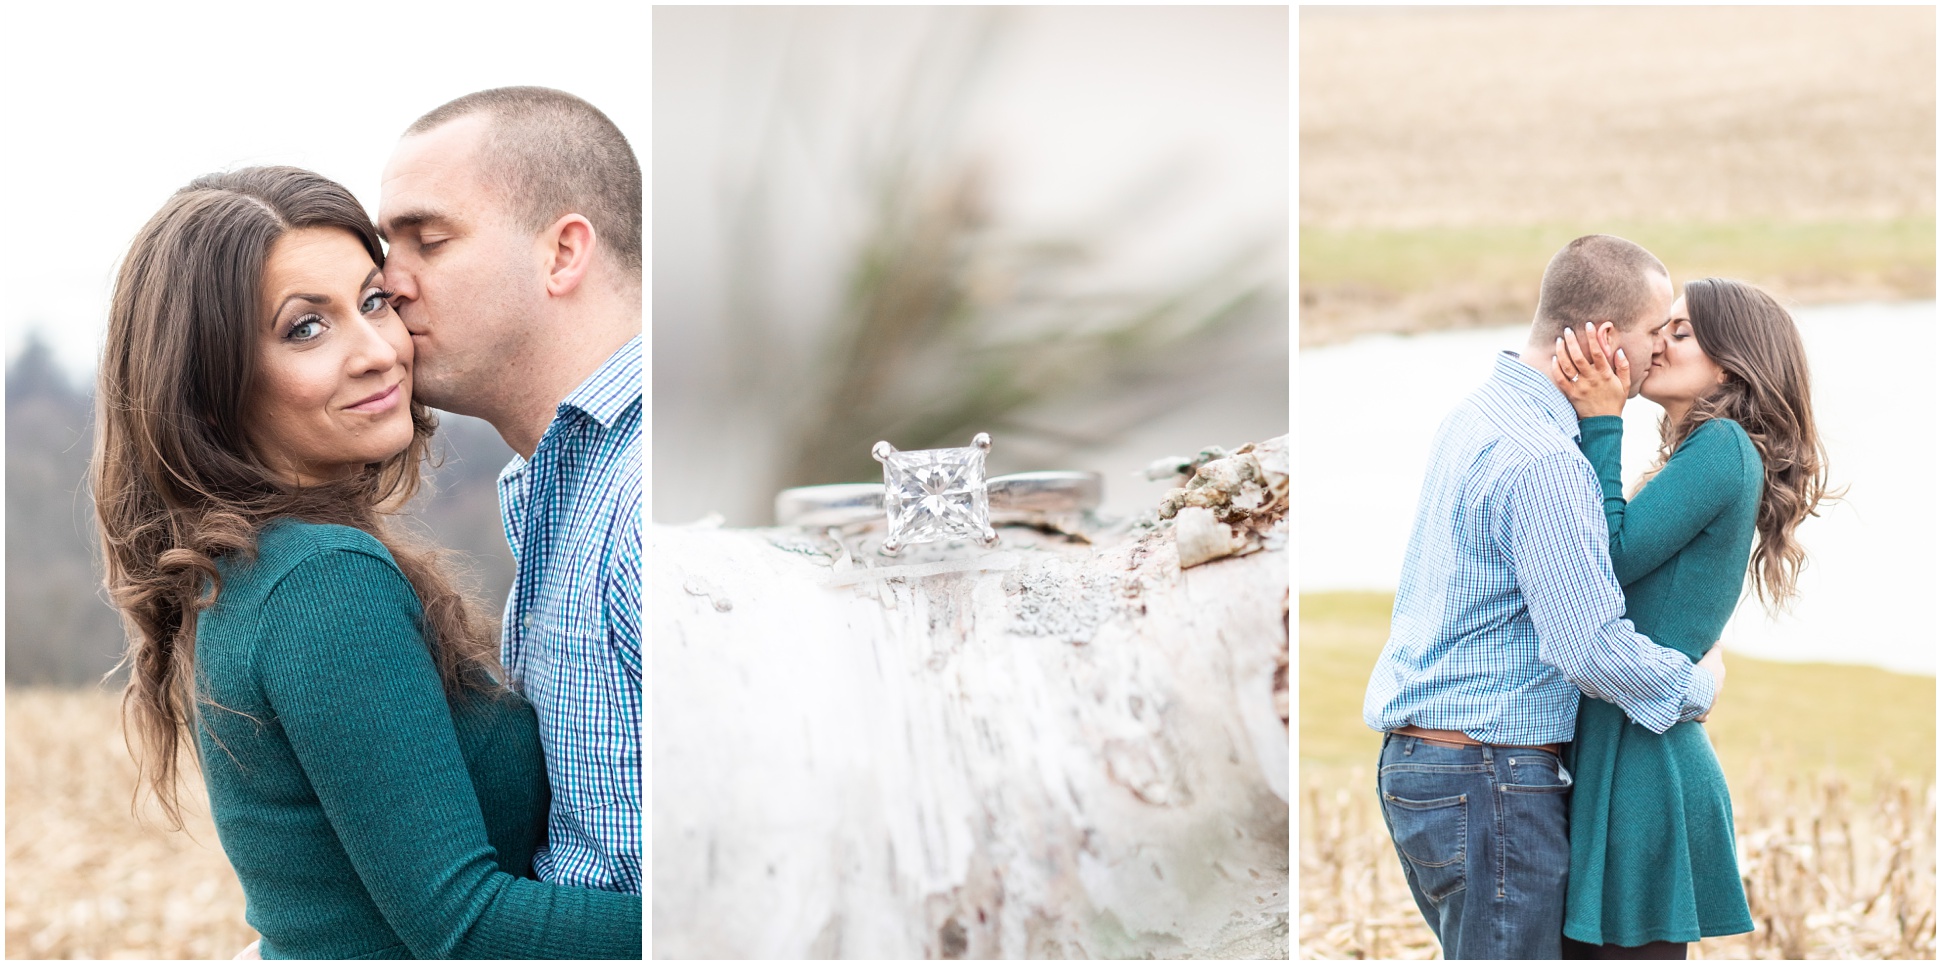 Three photos from Valerie and Ryan's Engagement session